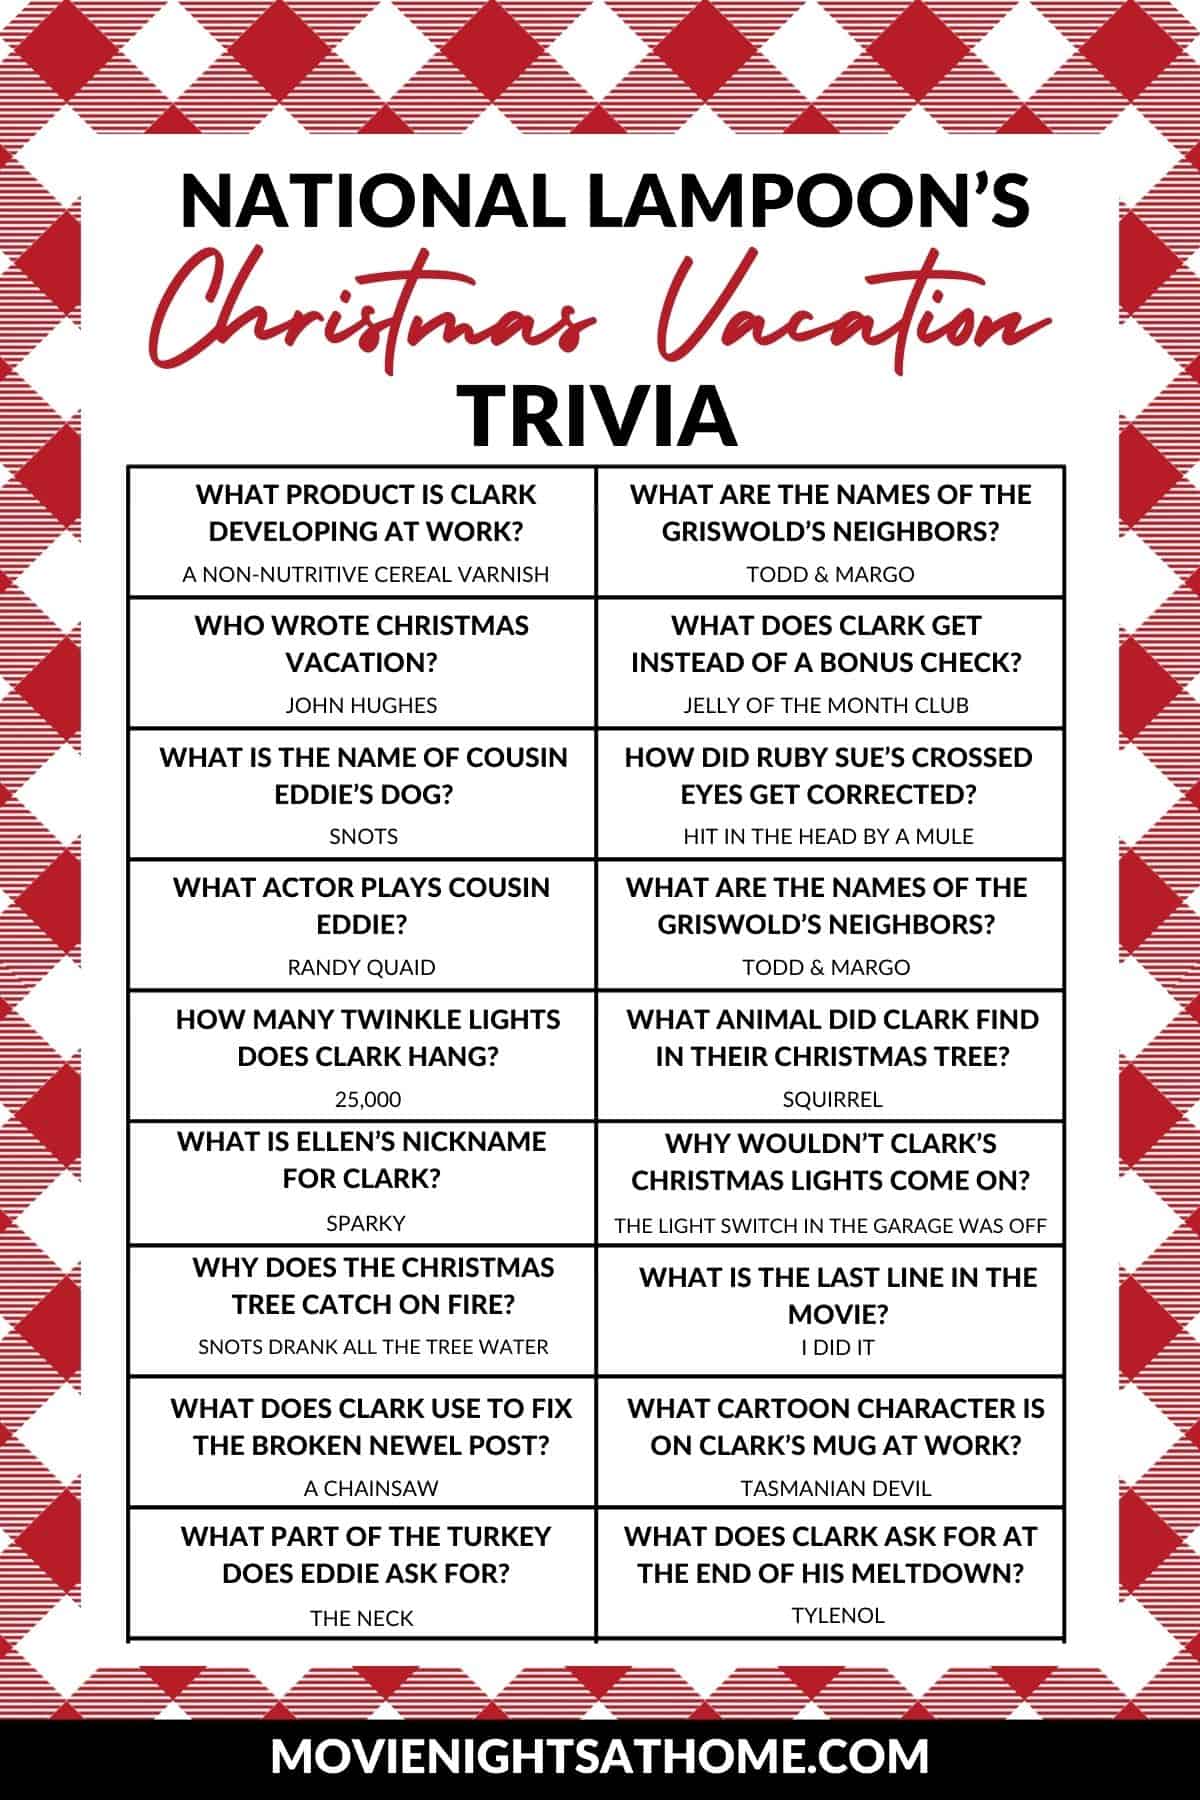 Sample of national lampoons Christmas vacation trivia - questions and answers